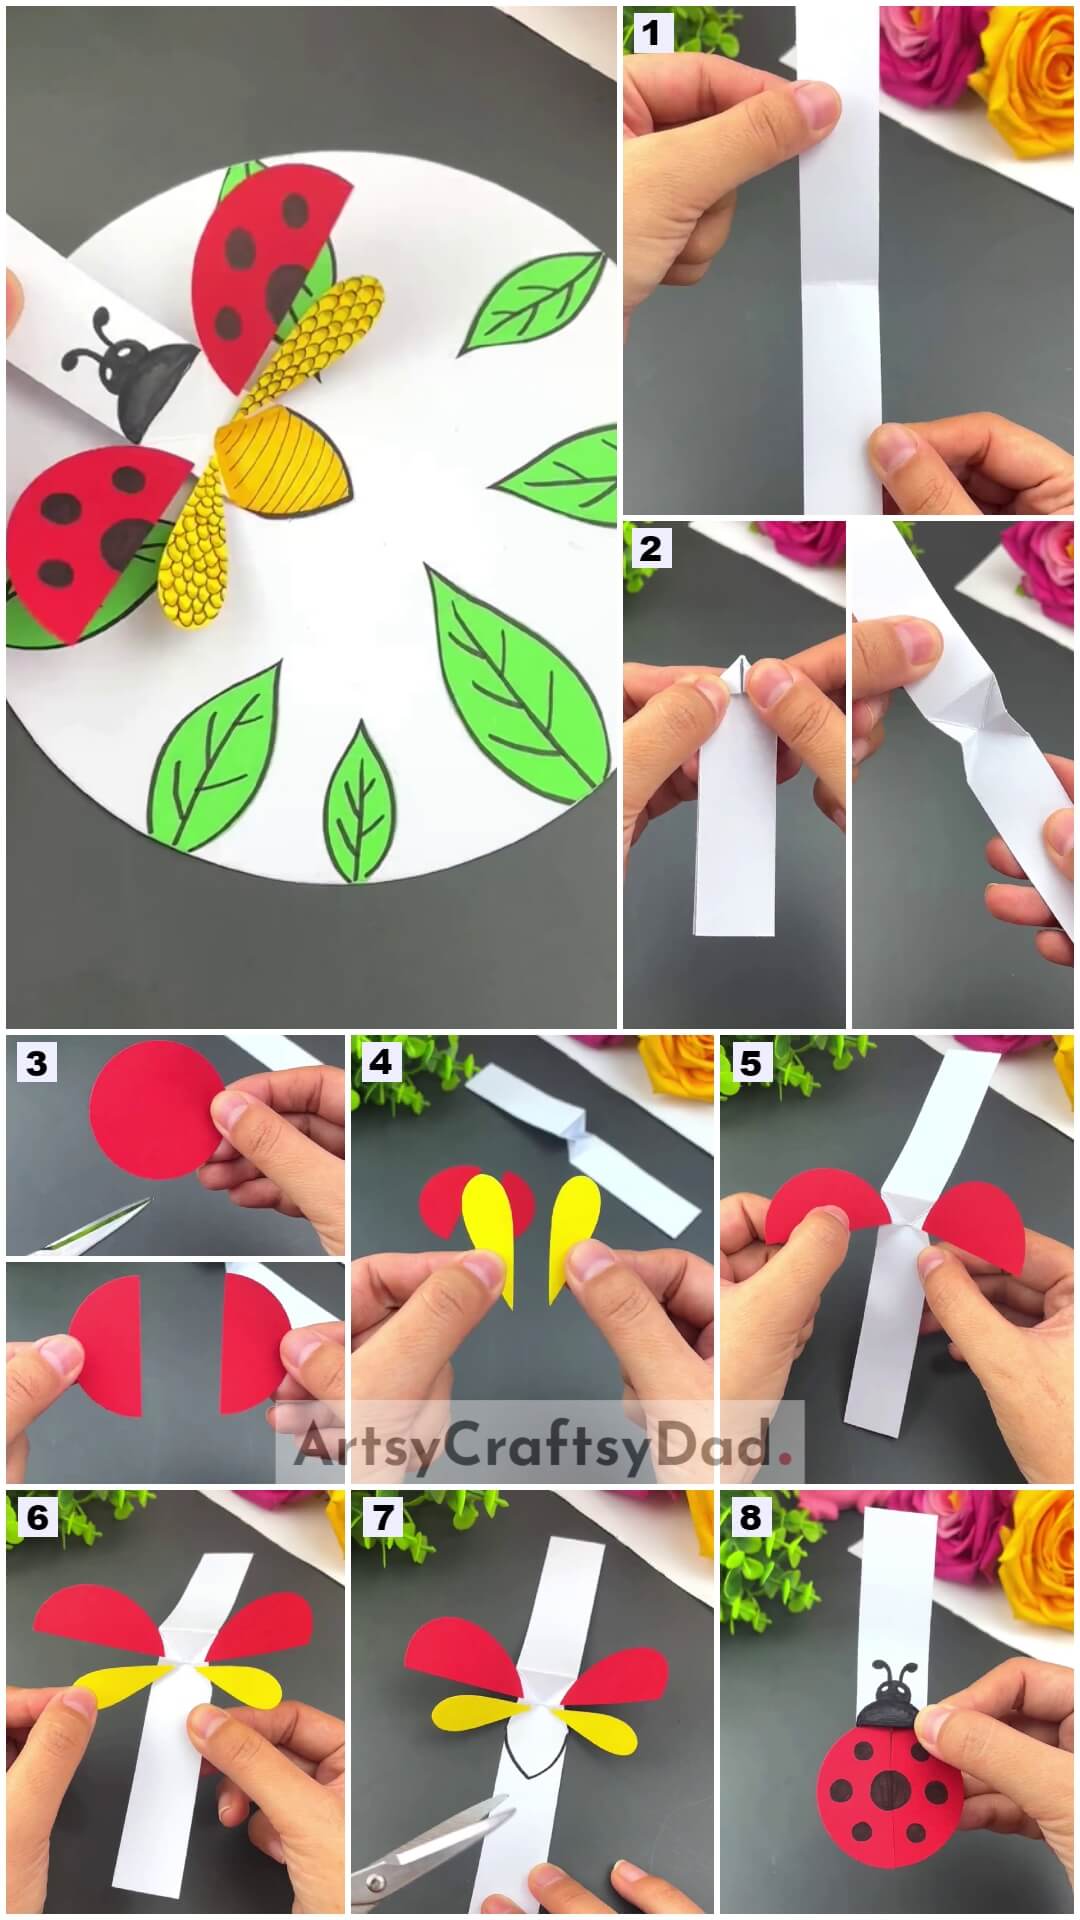 How To Make Flying Paper Ladybug Craft Tutorial For Kids